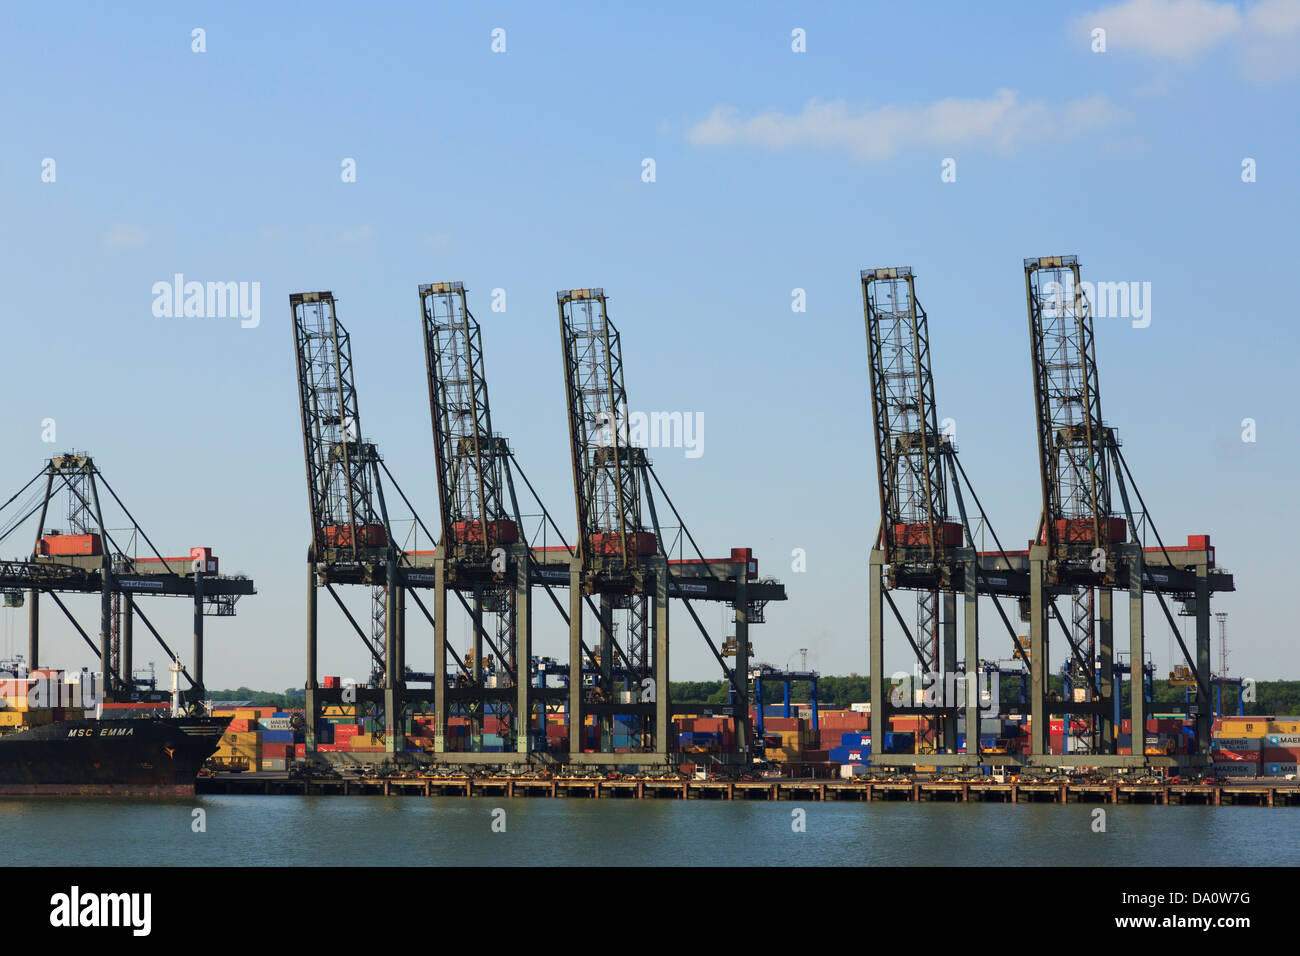 Port of Felixstowe gantry cranes for lifting containers on dockside at Trinity terminal quay of largest container port in UK Stock Photo